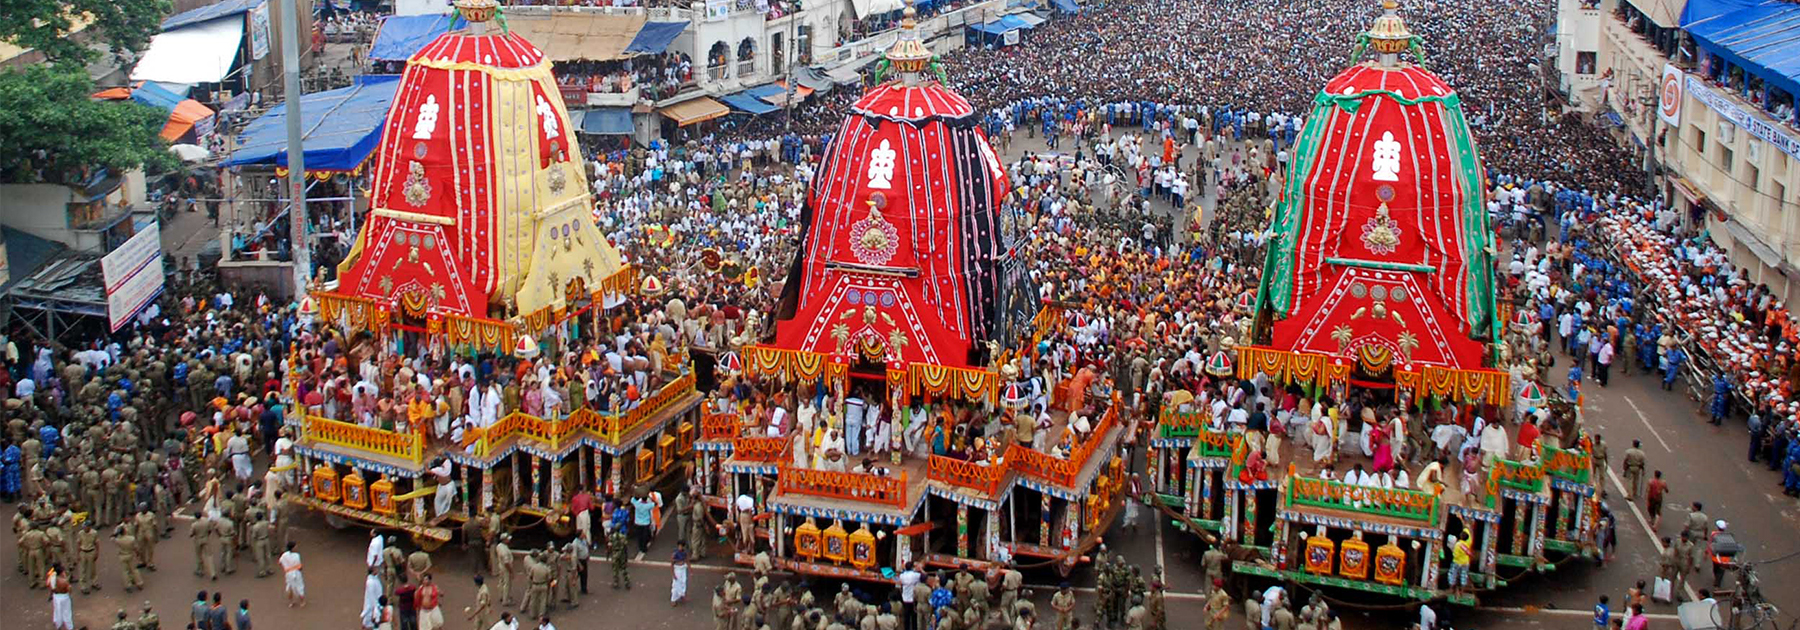 Hindu devotees gather as three giant chariots are pulled during the Rath Yatra of Lord Jagannath in Puri. (STR/AFP/GettyImages)